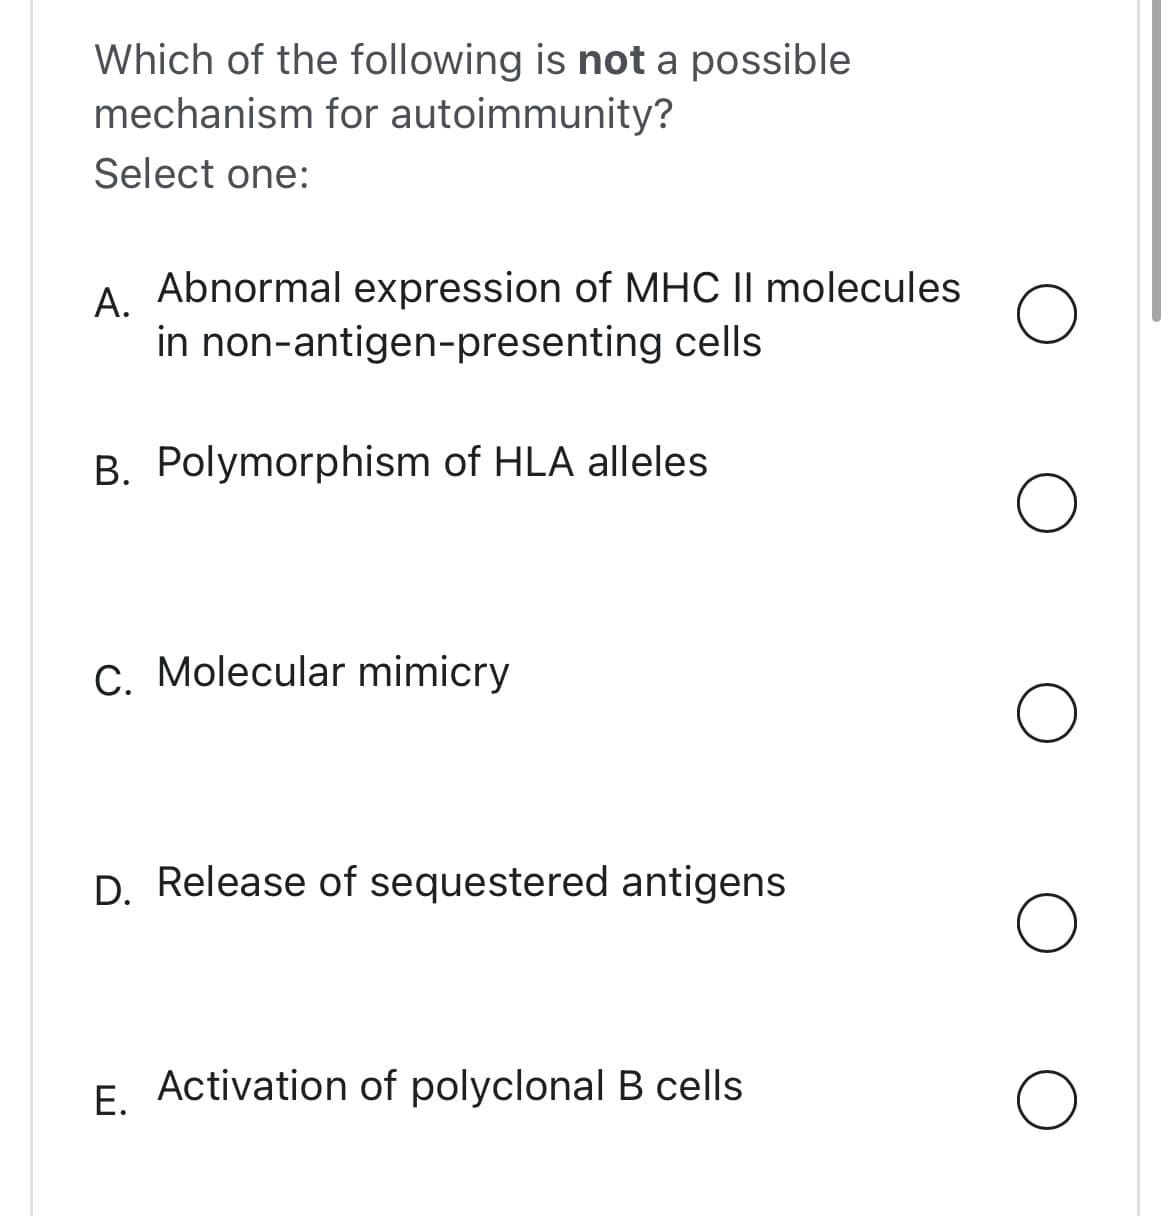 Which of the following is not a possible
mechanism for autoimmunity?
Select one:
A. Abnormal expression of MHC II molecules
in non-antigen-presenting cells
B. Polymorphism of HLA alleles
C. Molecular mimicry
D. Release of sequestered antigens
E. Activation of polyclonal B cells
O
O
O
O